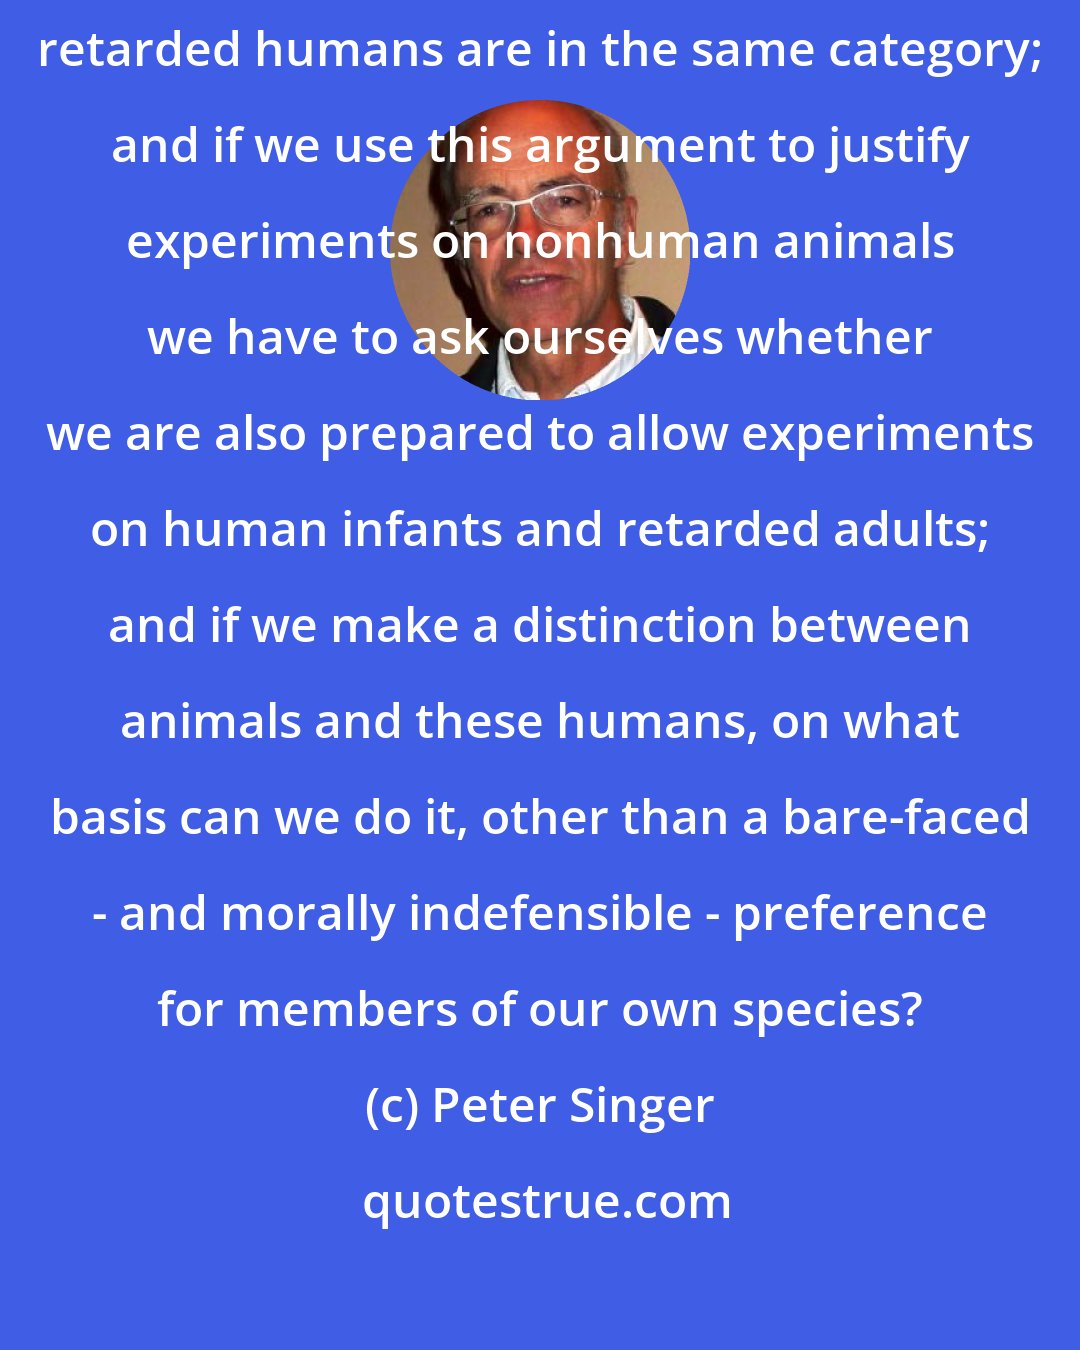 Peter Singer: So far as this argument is concerned nonhuman animals and infants and retarded humans are in the same category; and if we use this argument to justify experiments on nonhuman animals we have to ask ourselves whether we are also prepared to allow experiments on human infants and retarded adults; and if we make a distinction between animals and these humans, on what basis can we do it, other than a bare-faced - and morally indefensible - preference for members of our own species?